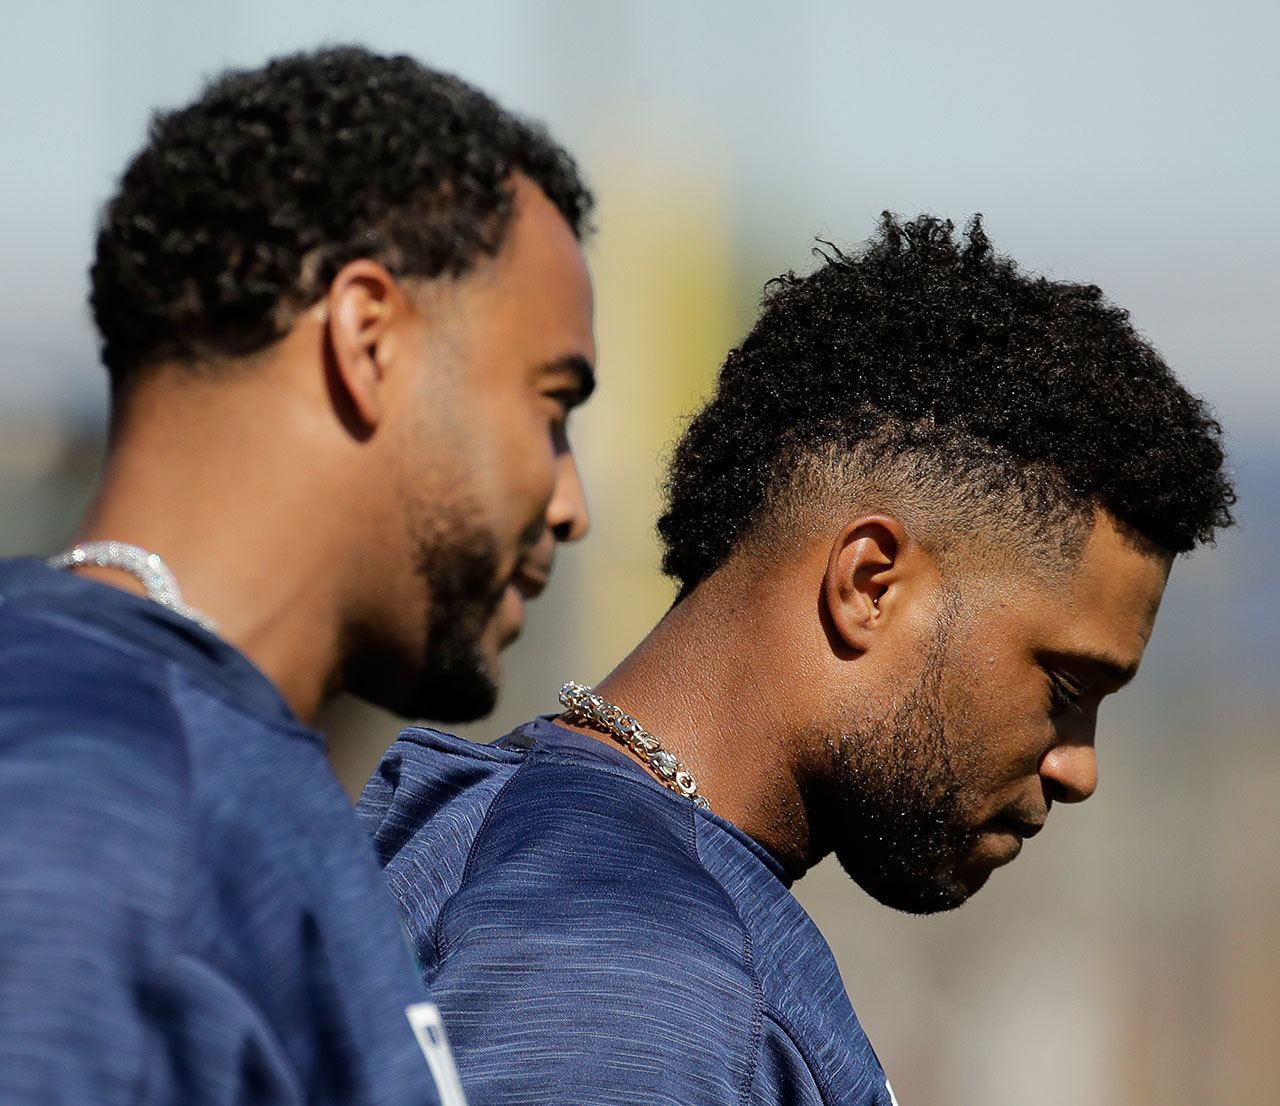 The Mariners’ Nelson Cruz (left) and Robinson Cano walk to a drill during spring training Feb. 21, 2017, in Peoria, Ariz. (AP Photo/Charlie Riedel)